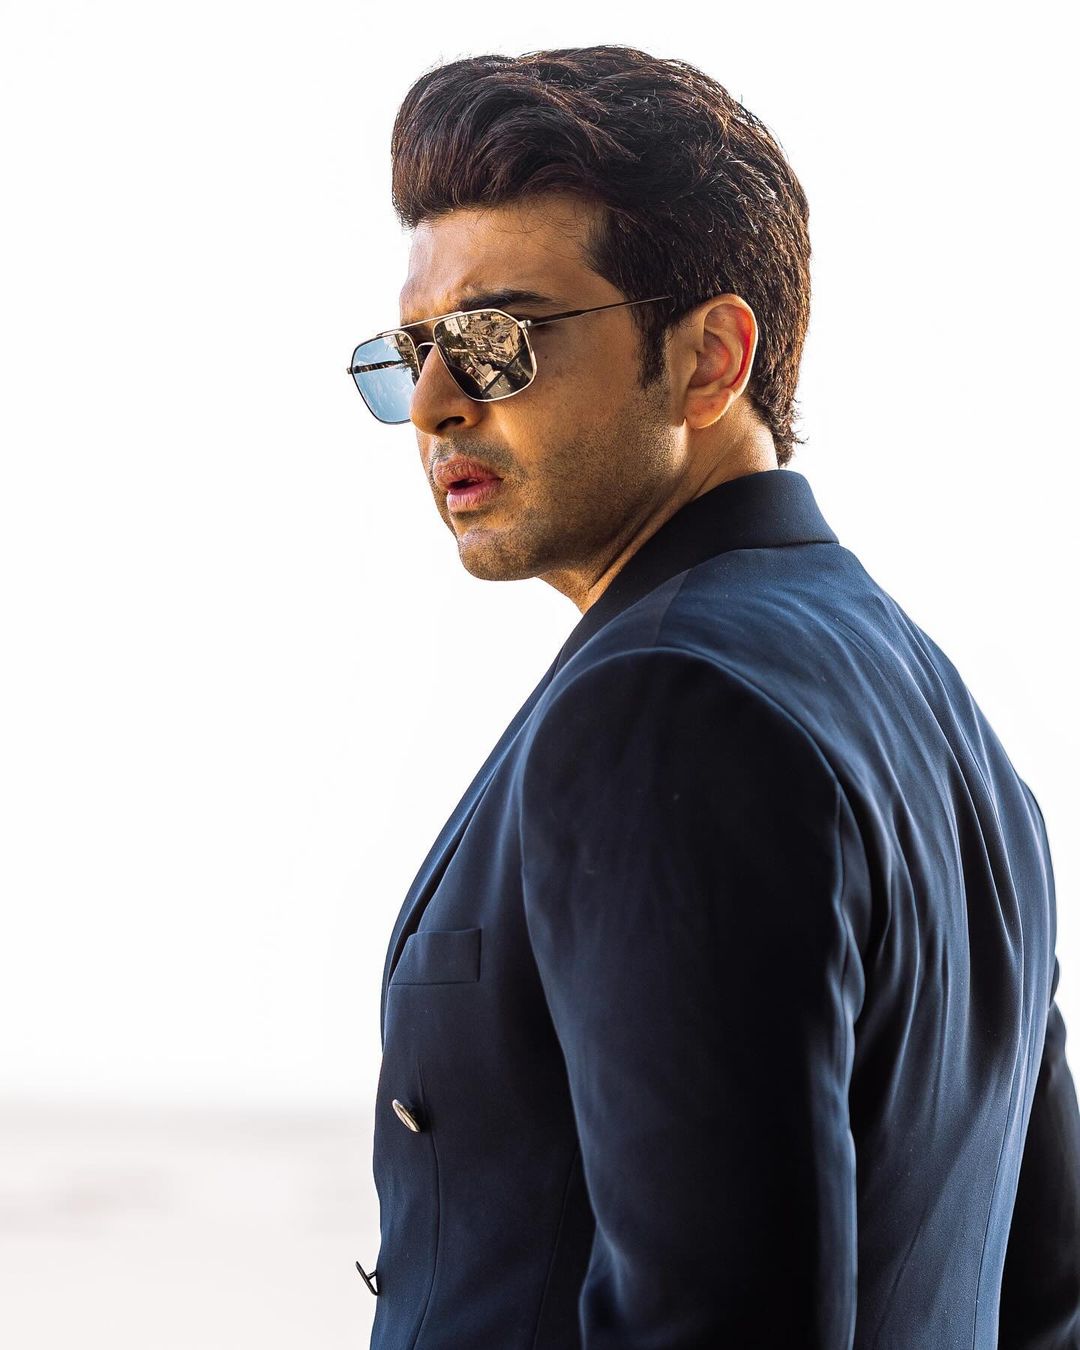 Karan Kundra Says People Should Stop Comparing Actors. Find Out Why He Says It! 